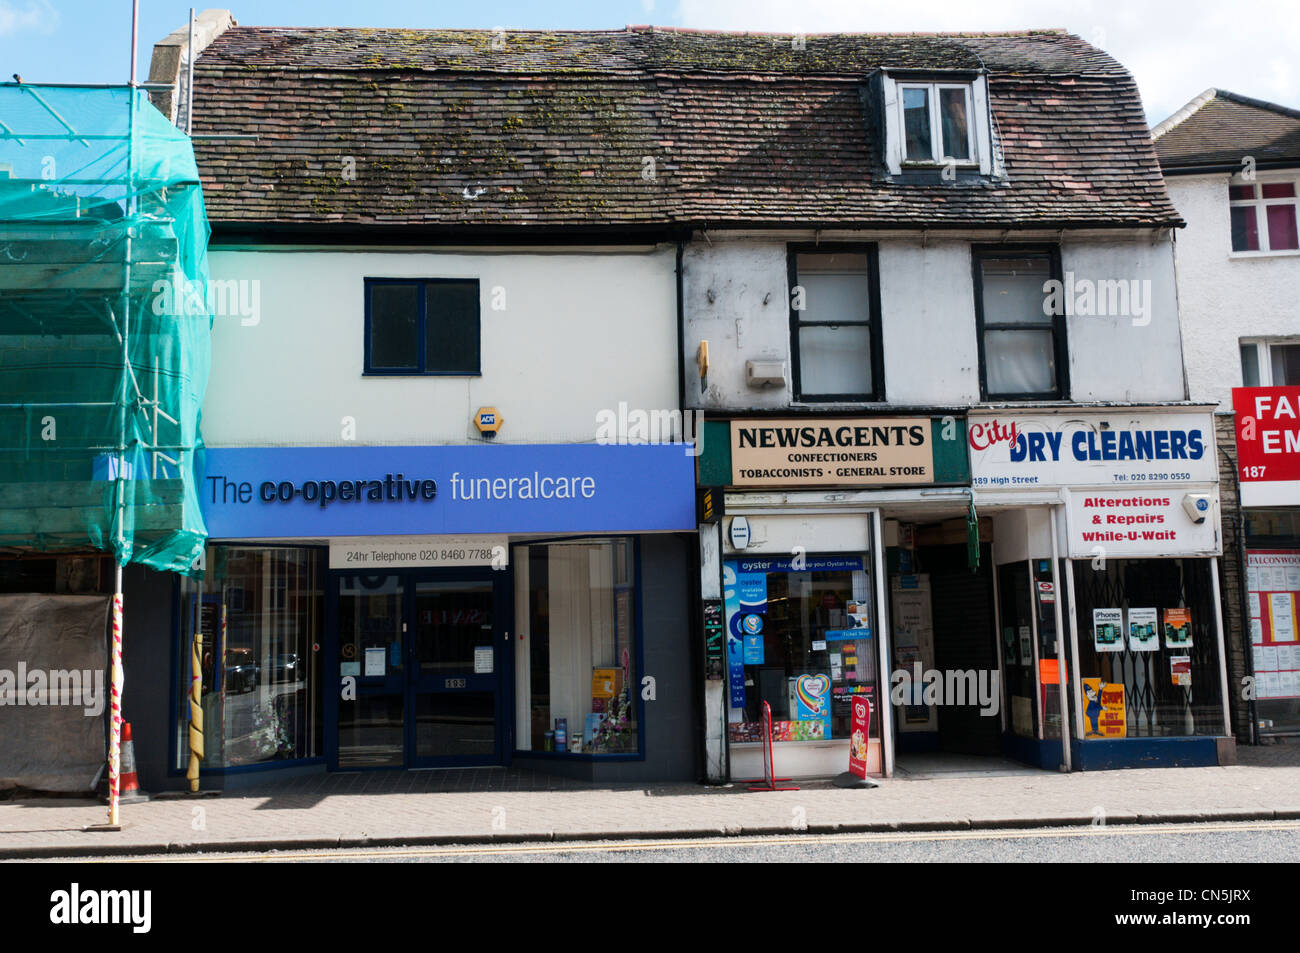 Co-op Funeralcare in parade of small traditional shop fronts. Stock Photo